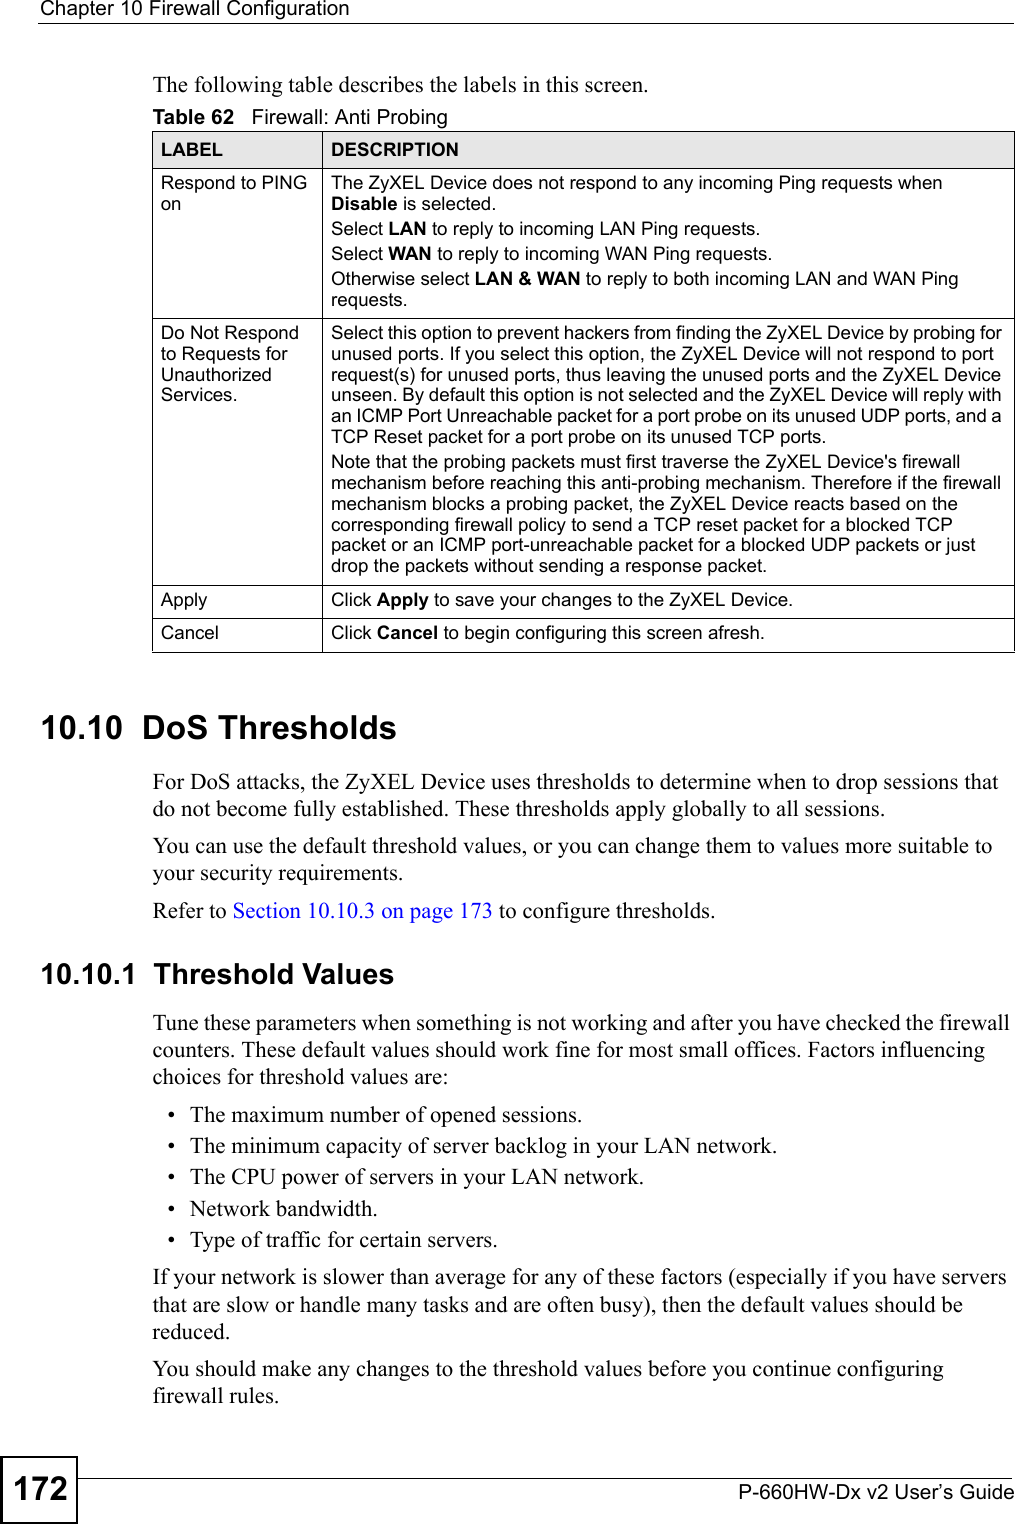 Chapter 10 Firewall ConfigurationP-660HW-Dx v2 User’s Guide172The following table describes the labels in this screen.10.10  DoS Thresholds For DoS attacks, the ZyXEL Device uses thresholds to determine when to drop sessions that do not become fully established. These thresholds apply globally to all sessions.You can use the default threshold values, or you can change them to values more suitable to your security requirements.Refer to Section 10.10.3 on page 173 to configure thresholds. 10.10.1  Threshold ValuesTune these parameters when something is not working and after you have checked the firewall counters. These default values should work fine for most small offices. Factors influencing choices for threshold values are:• The maximum number of opened sessions.• The minimum capacity of server backlog in your LAN network.• The CPU power of servers in your LAN network.• Network bandwidth. • Type of traffic for certain servers.If your network is slower than average for any of these factors (especially if you have servers that are slow or handle many tasks and are often busy), then the default values should be reduced.You should make any changes to the threshold values before you continue configuring firewall rules. Table 62   Firewall: Anti ProbingLABEL DESCRIPTIONRespond to PING onThe ZyXEL Device does not respond to any incoming Ping requests when Disable is selected. Select LAN to reply to incoming LAN Ping requests.Select WAN to reply to incoming WAN Ping requests. Otherwise select LAN &amp; WAN to reply to both incoming LAN and WAN Ping requests. Do Not Respond to Requests for Unauthorized Services.Select this option to prevent hackers from finding the ZyXEL Device by probing for unused ports. If you select this option, the ZyXEL Device will not respond to port request(s) for unused ports, thus leaving the unused ports and the ZyXEL Device unseen. By default this option is not selected and the ZyXEL Device will reply with an ICMP Port Unreachable packet for a port probe on its unused UDP ports, and a TCP Reset packet for a port probe on its unused TCP ports. Note that the probing packets must first traverse the ZyXEL Device&apos;s firewall mechanism before reaching this anti-probing mechanism. Therefore if the firewall mechanism blocks a probing packet, the ZyXEL Device reacts based on the corresponding firewall policy to send a TCP reset packet for a blocked TCP packet or an ICMP port-unreachable packet for a blocked UDP packets or just drop the packets without sending a response packet.Apply Click Apply to save your changes to the ZyXEL Device.Cancel Click Cancel to begin configuring this screen afresh.